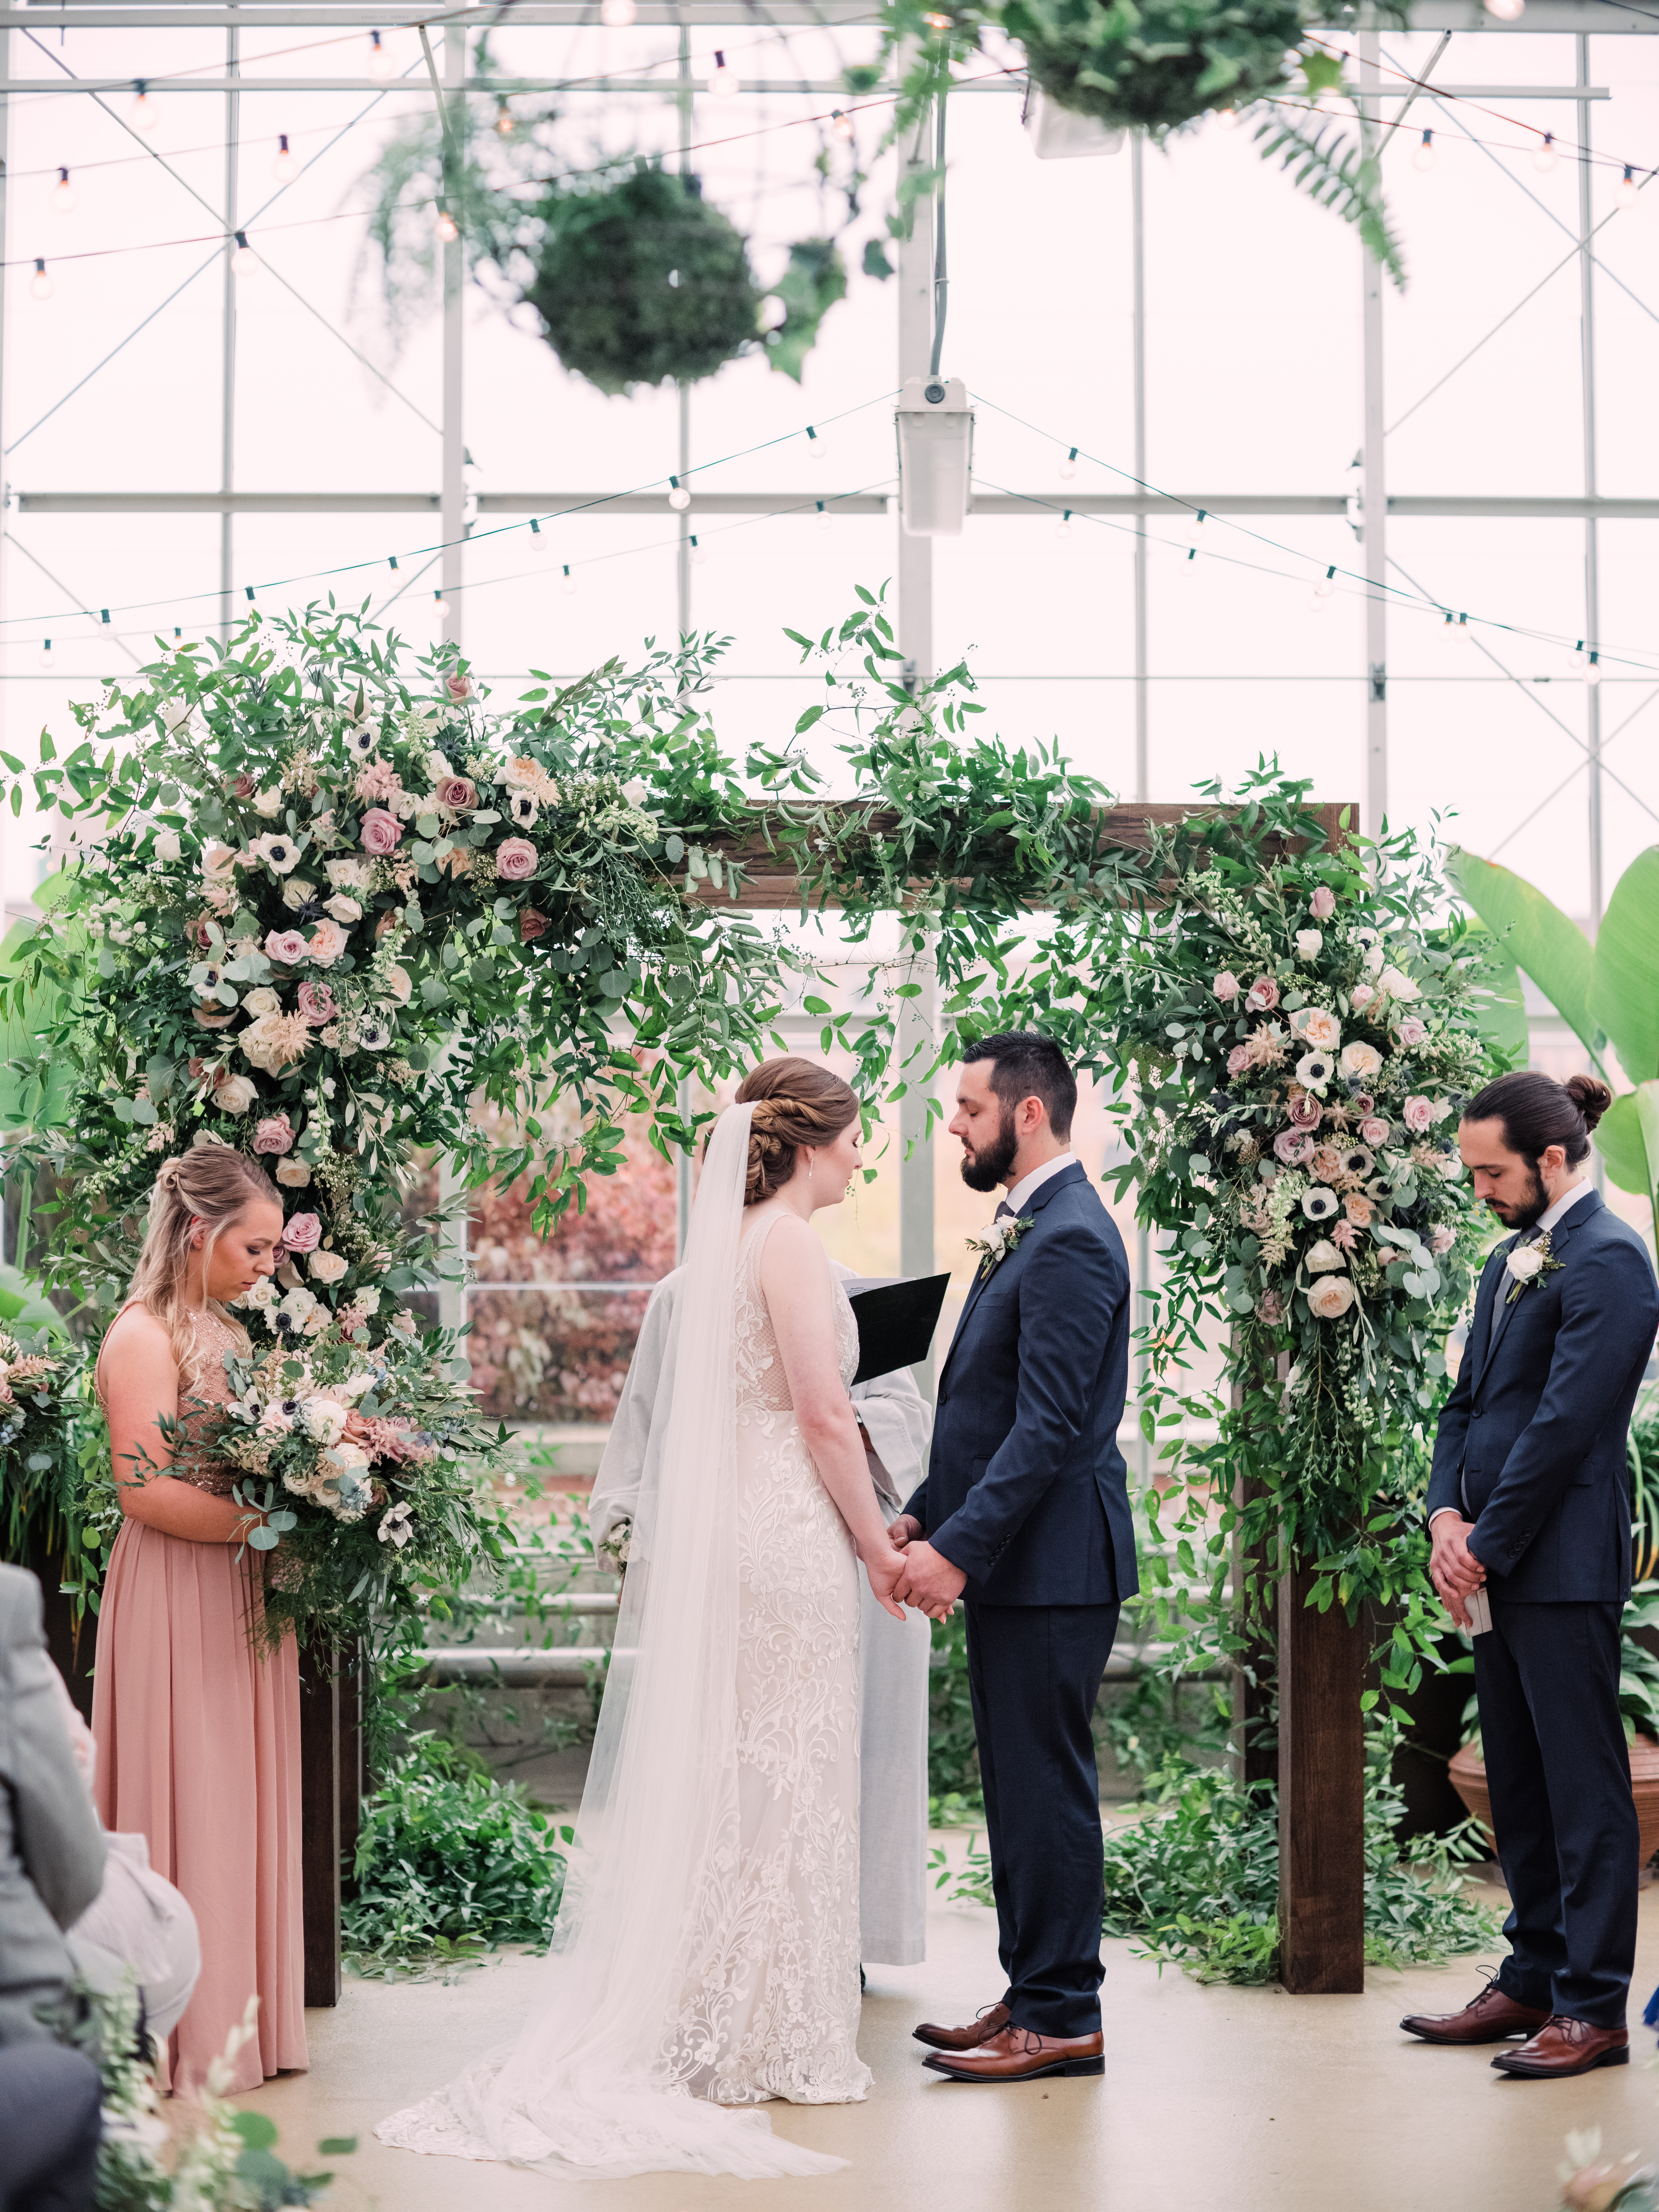 Bride and groom in front of floral arbor backdrop